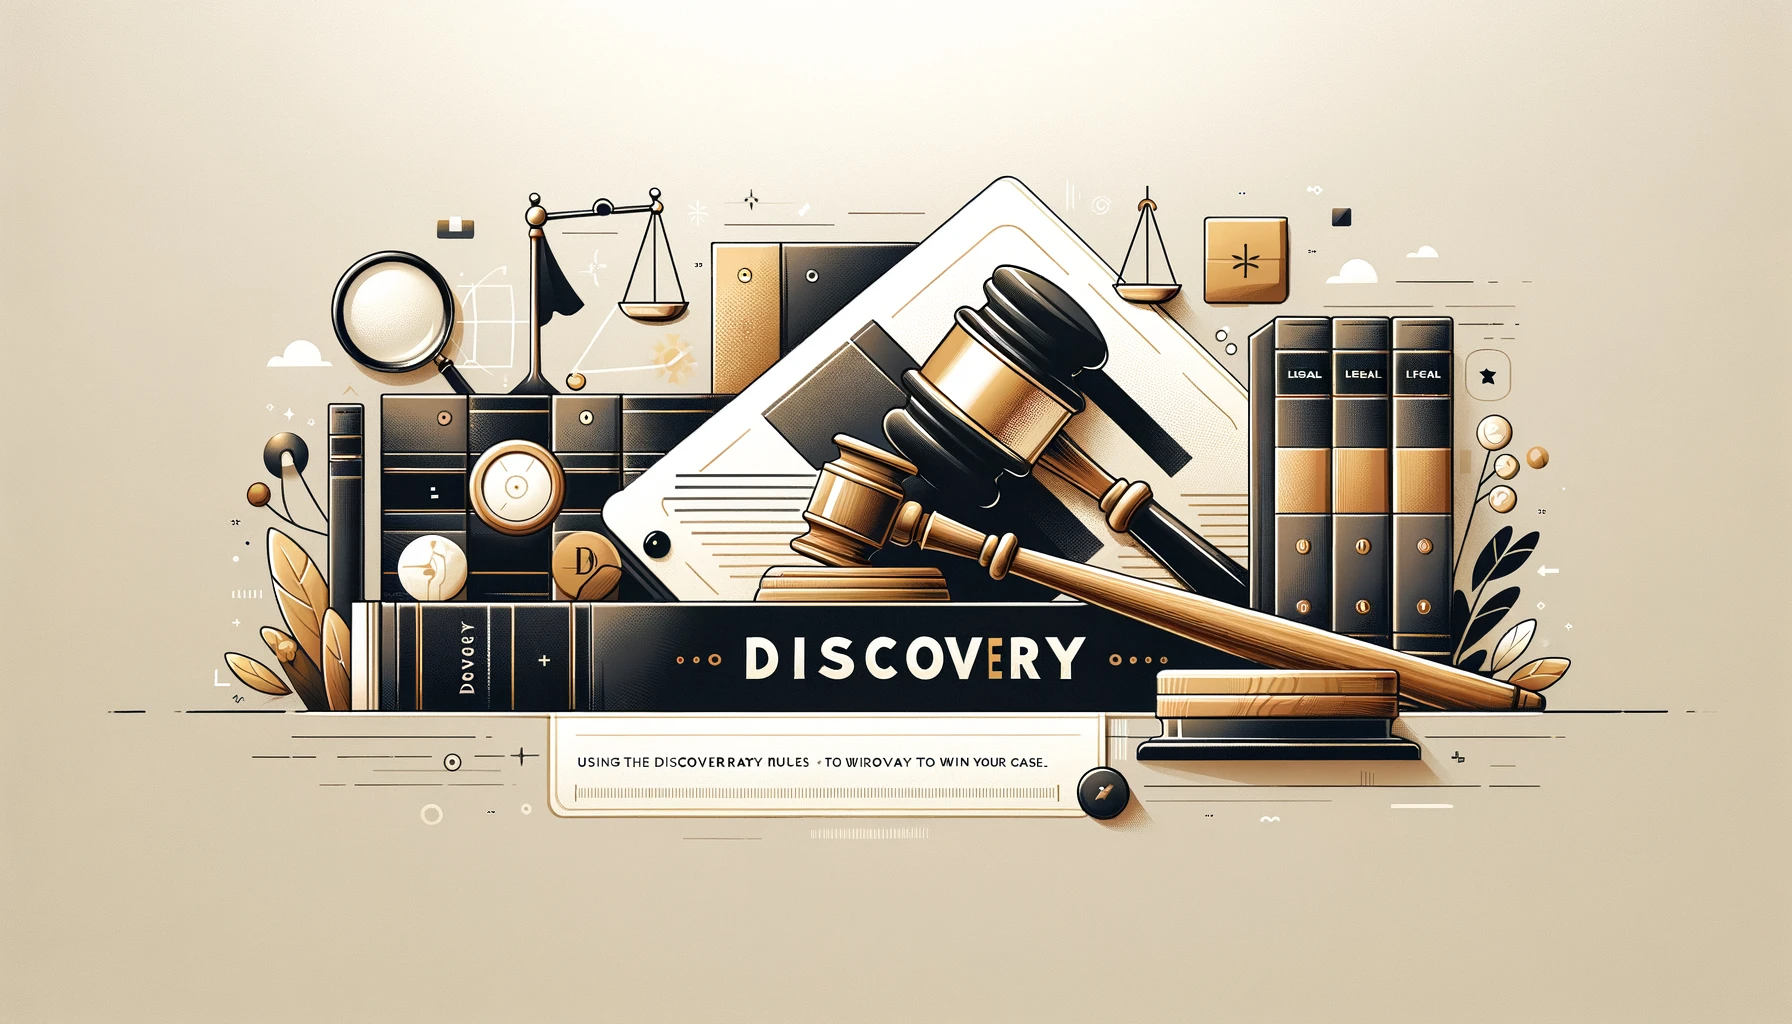 Using the Discovery Rules to WIN Your Case